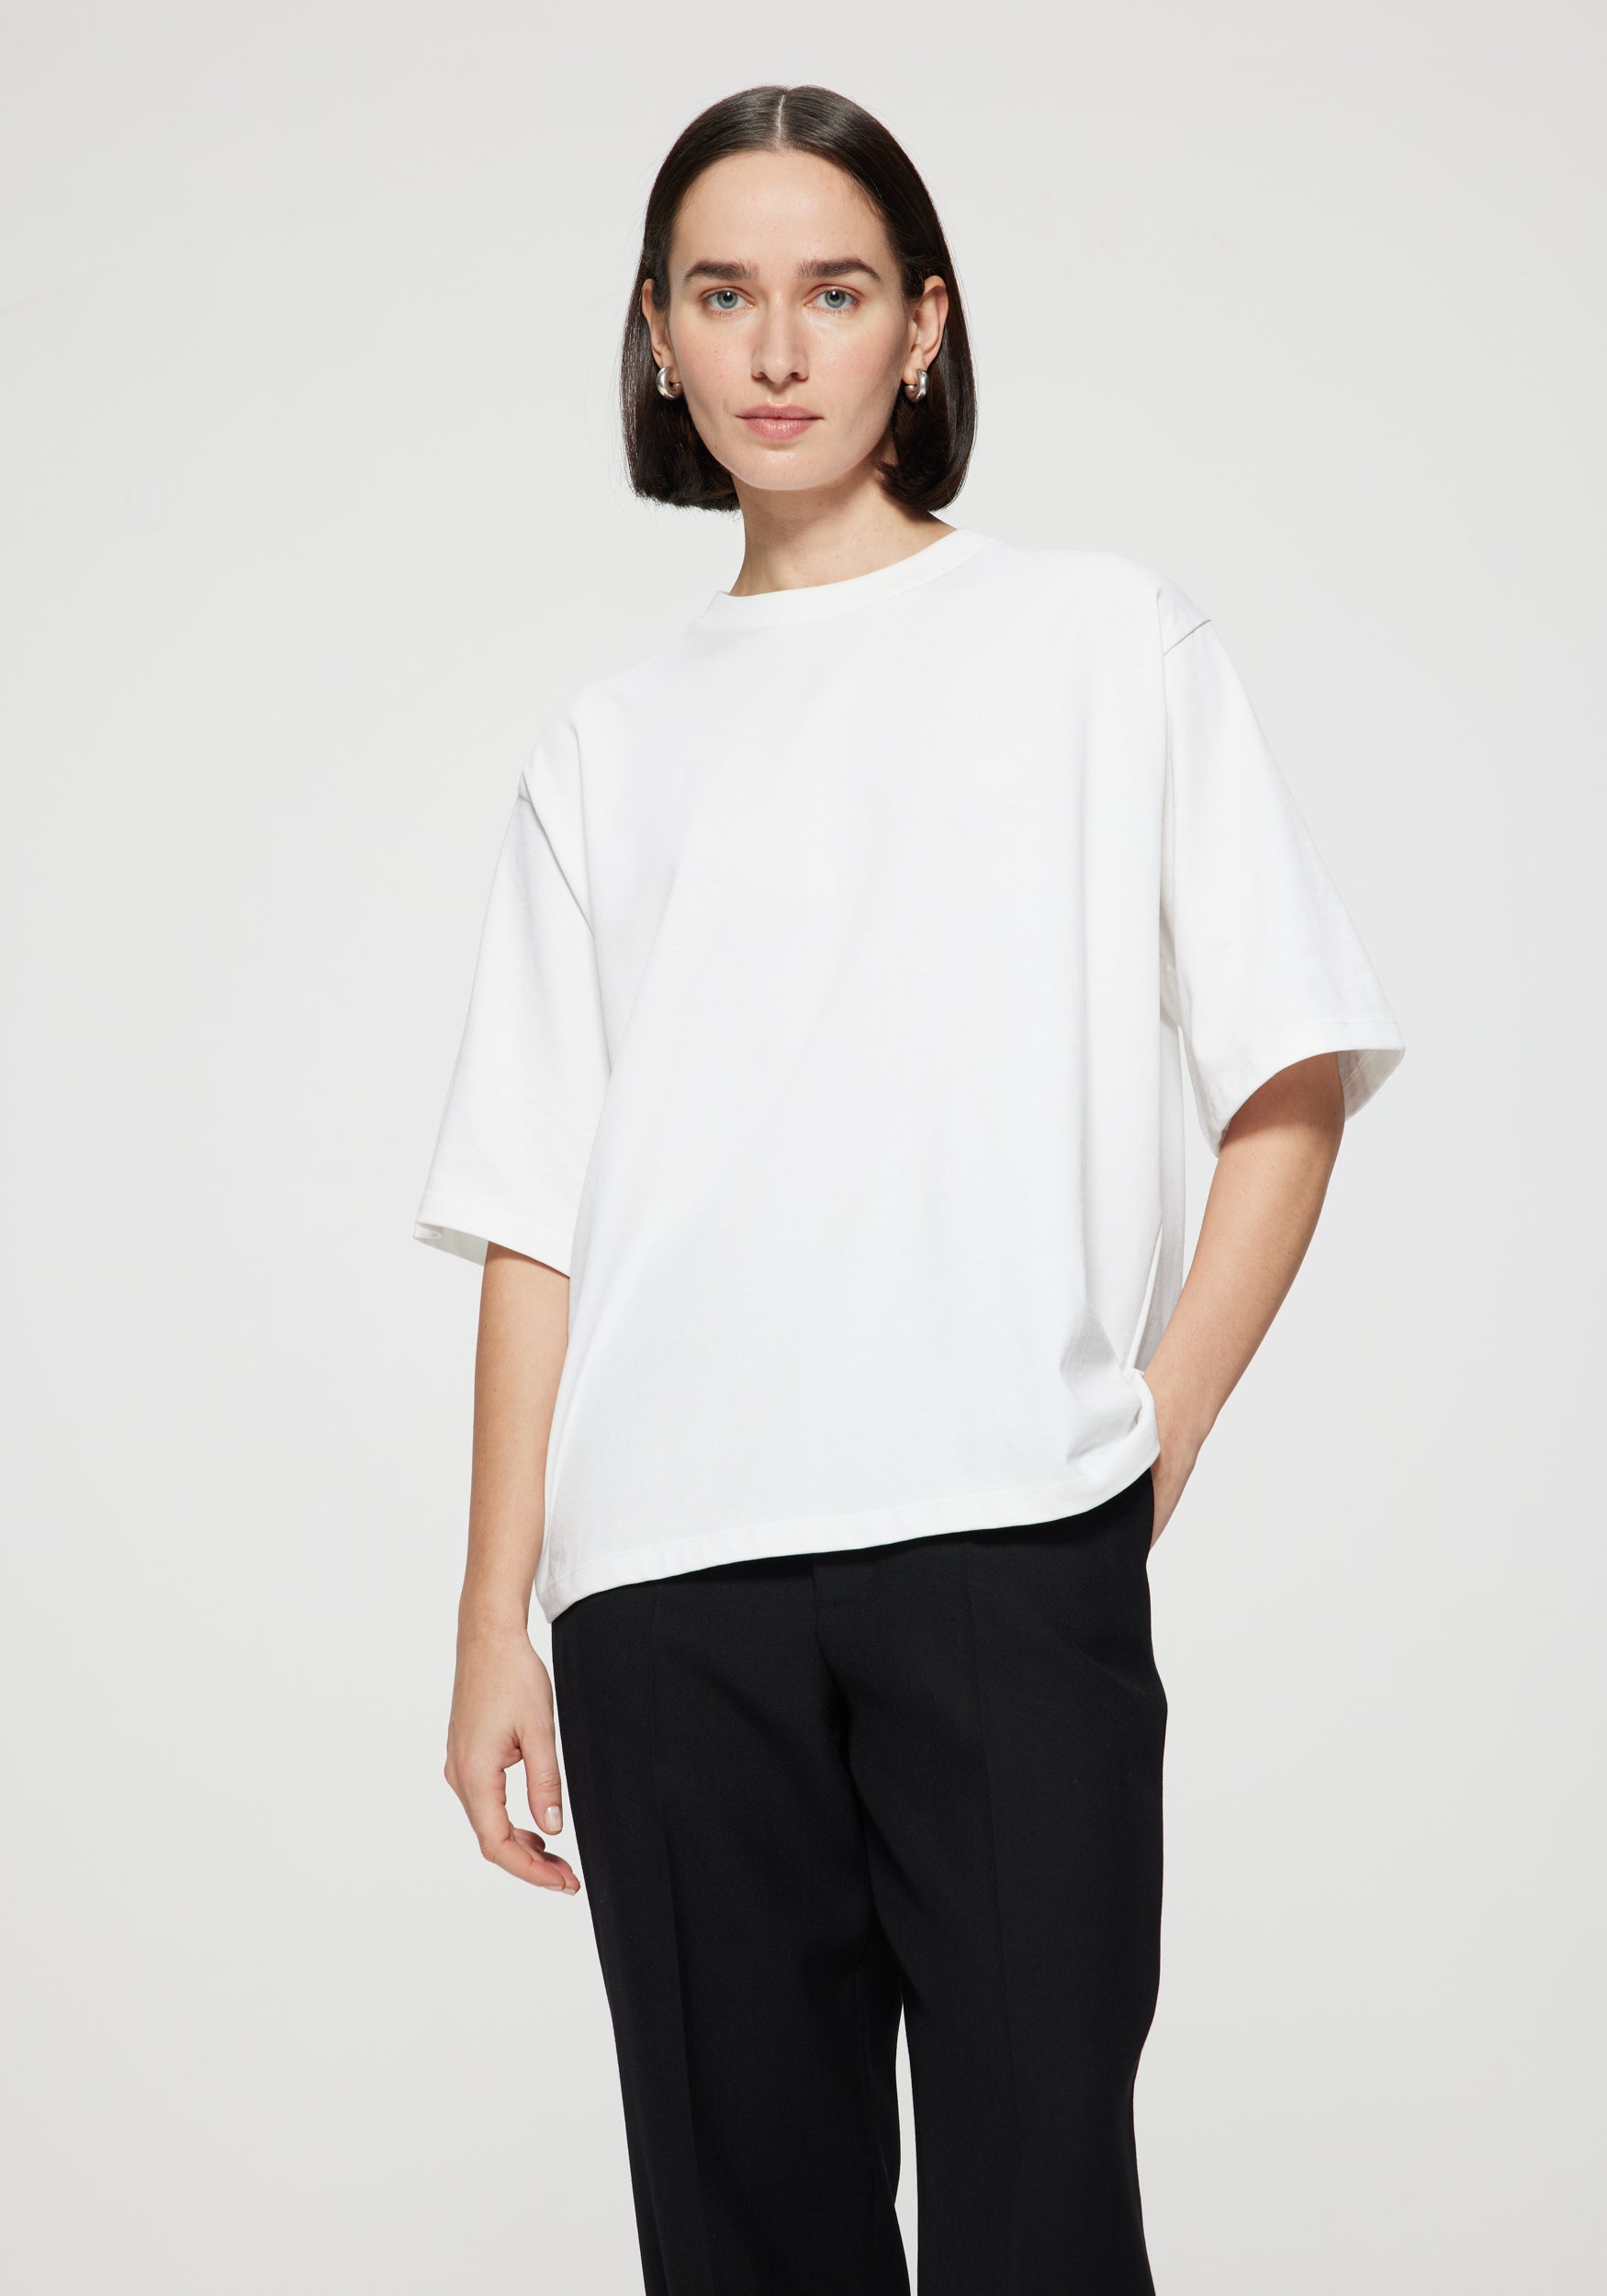 Rohe Classic T-Shirt in White available at TNT The New Trend Australia